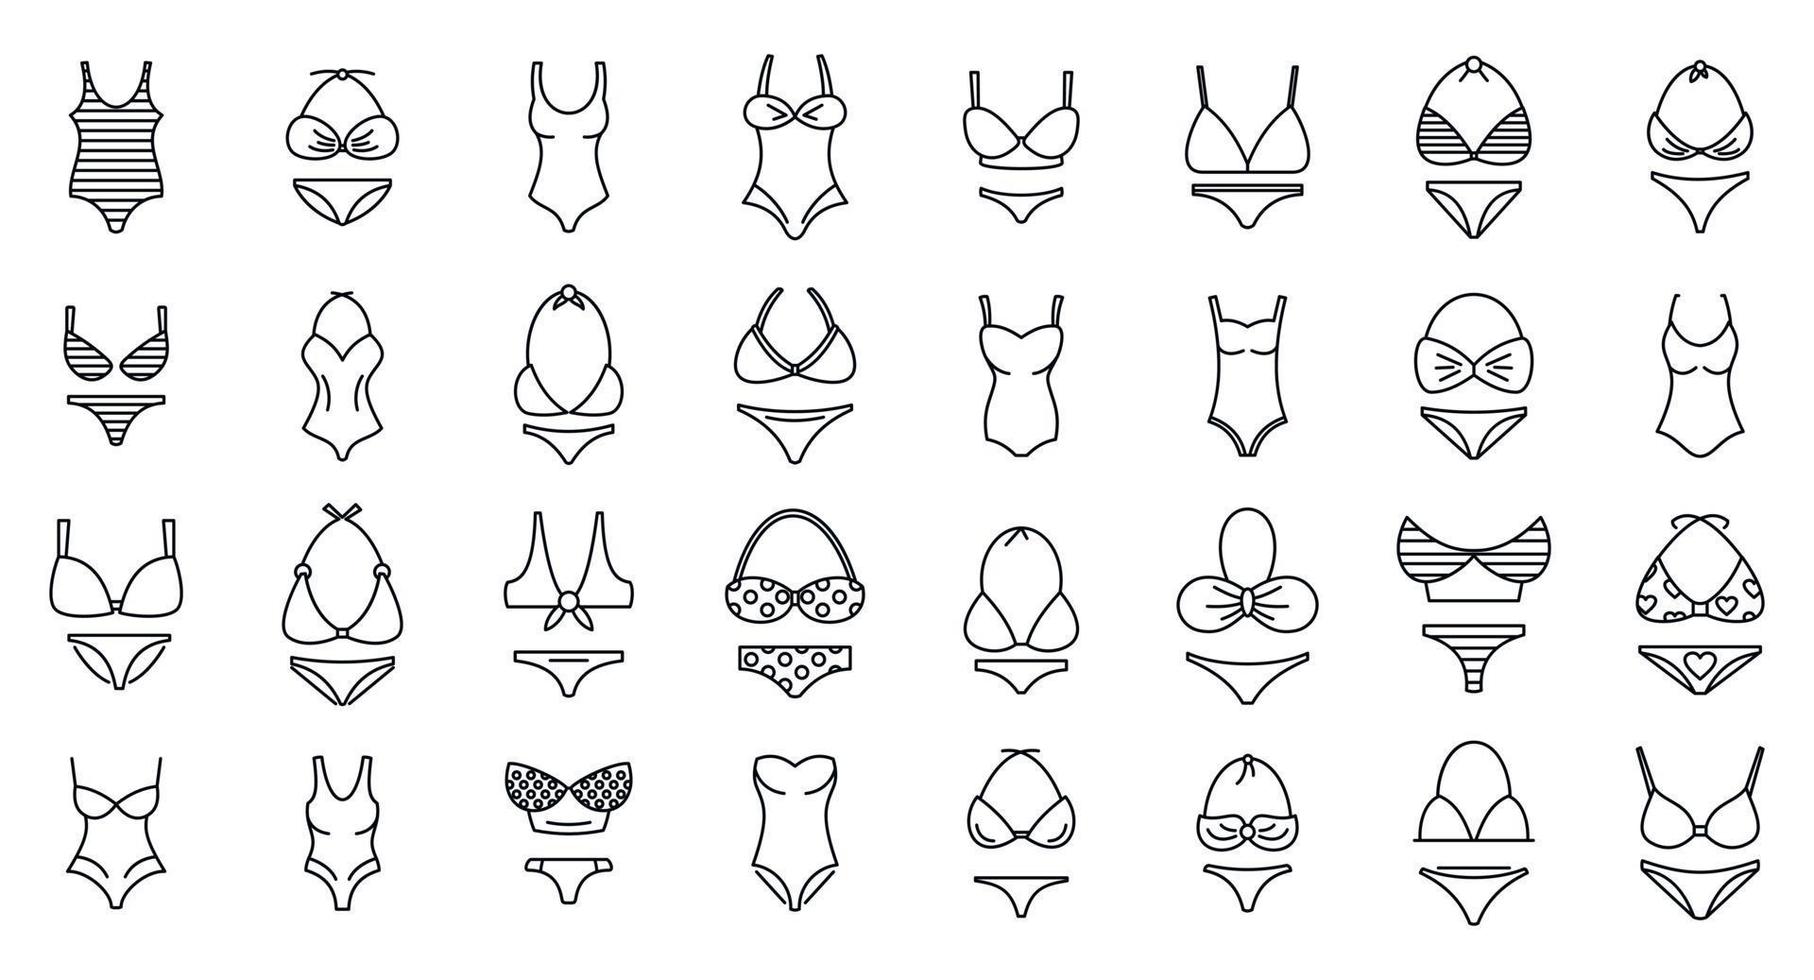 Modern swimsuit icons set, outline style vector